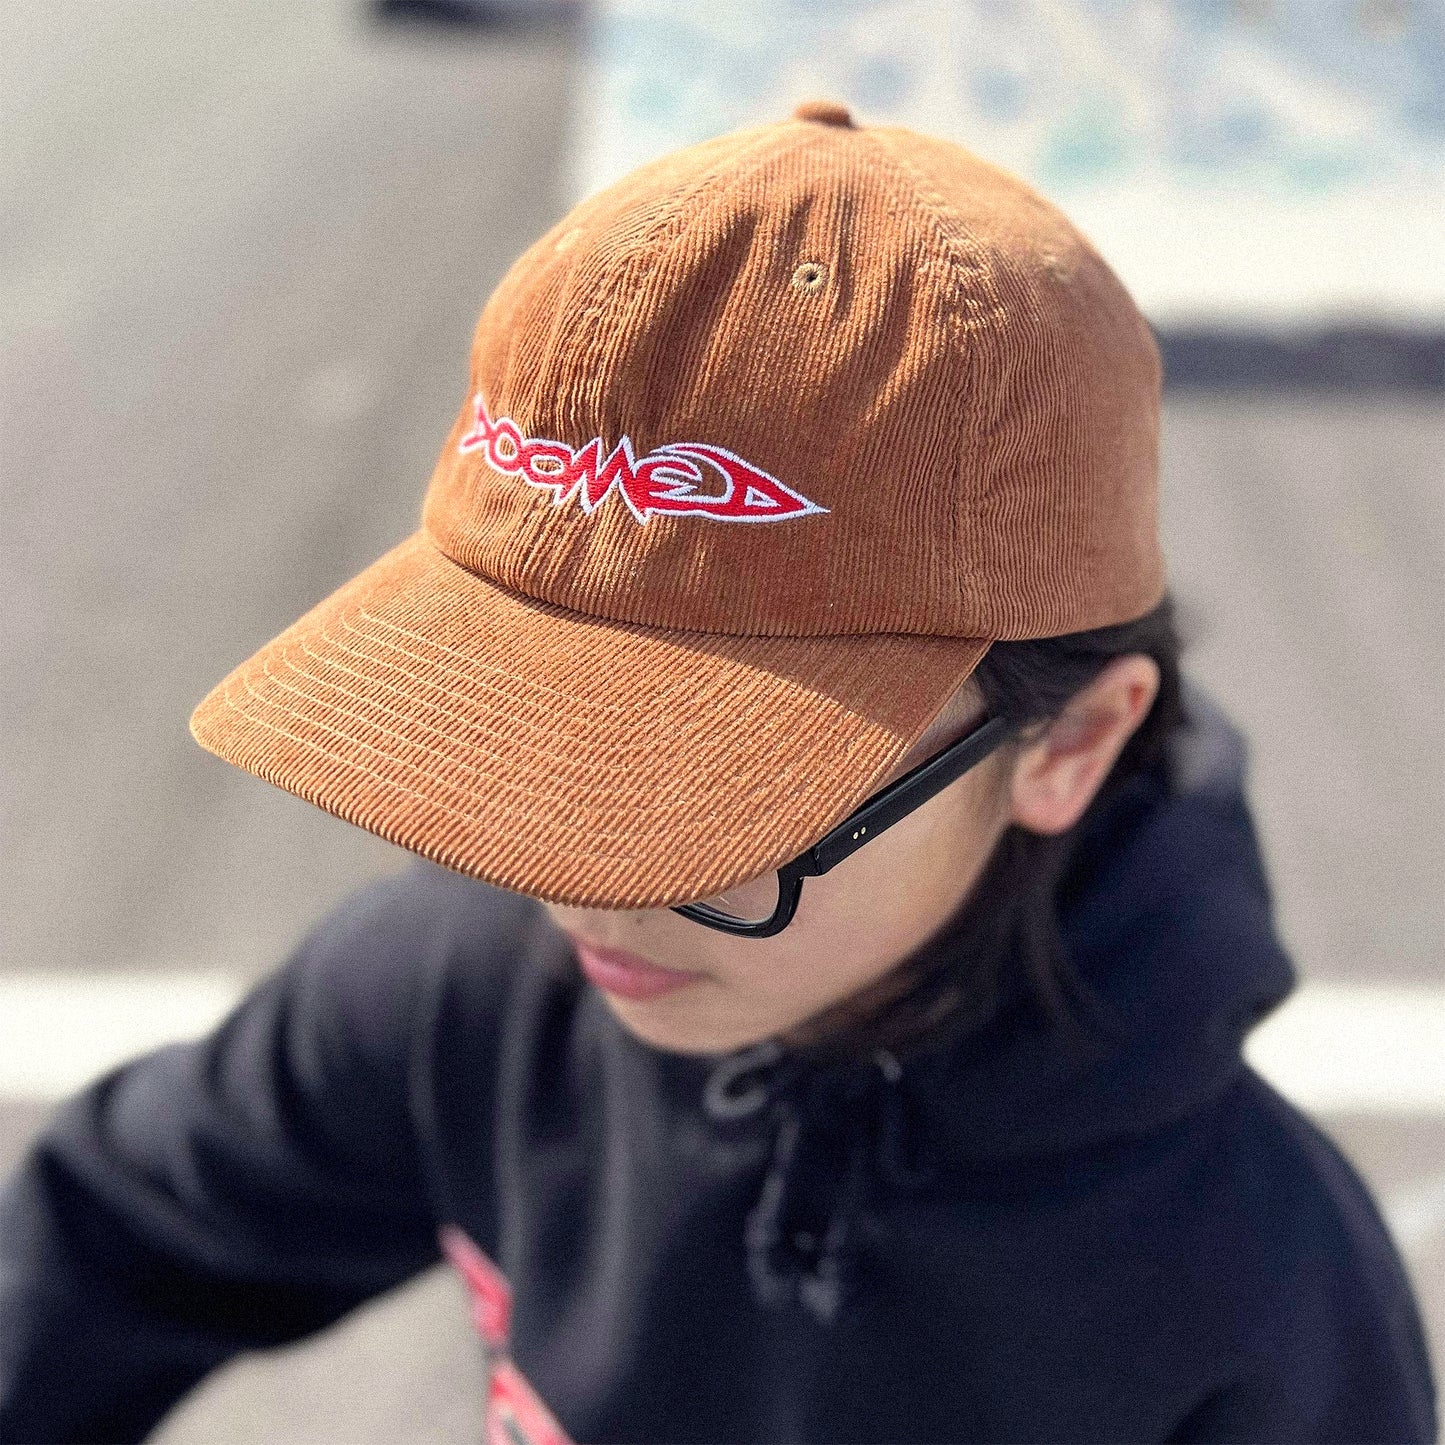 DOOMED - High Point Cord Cap/Brown